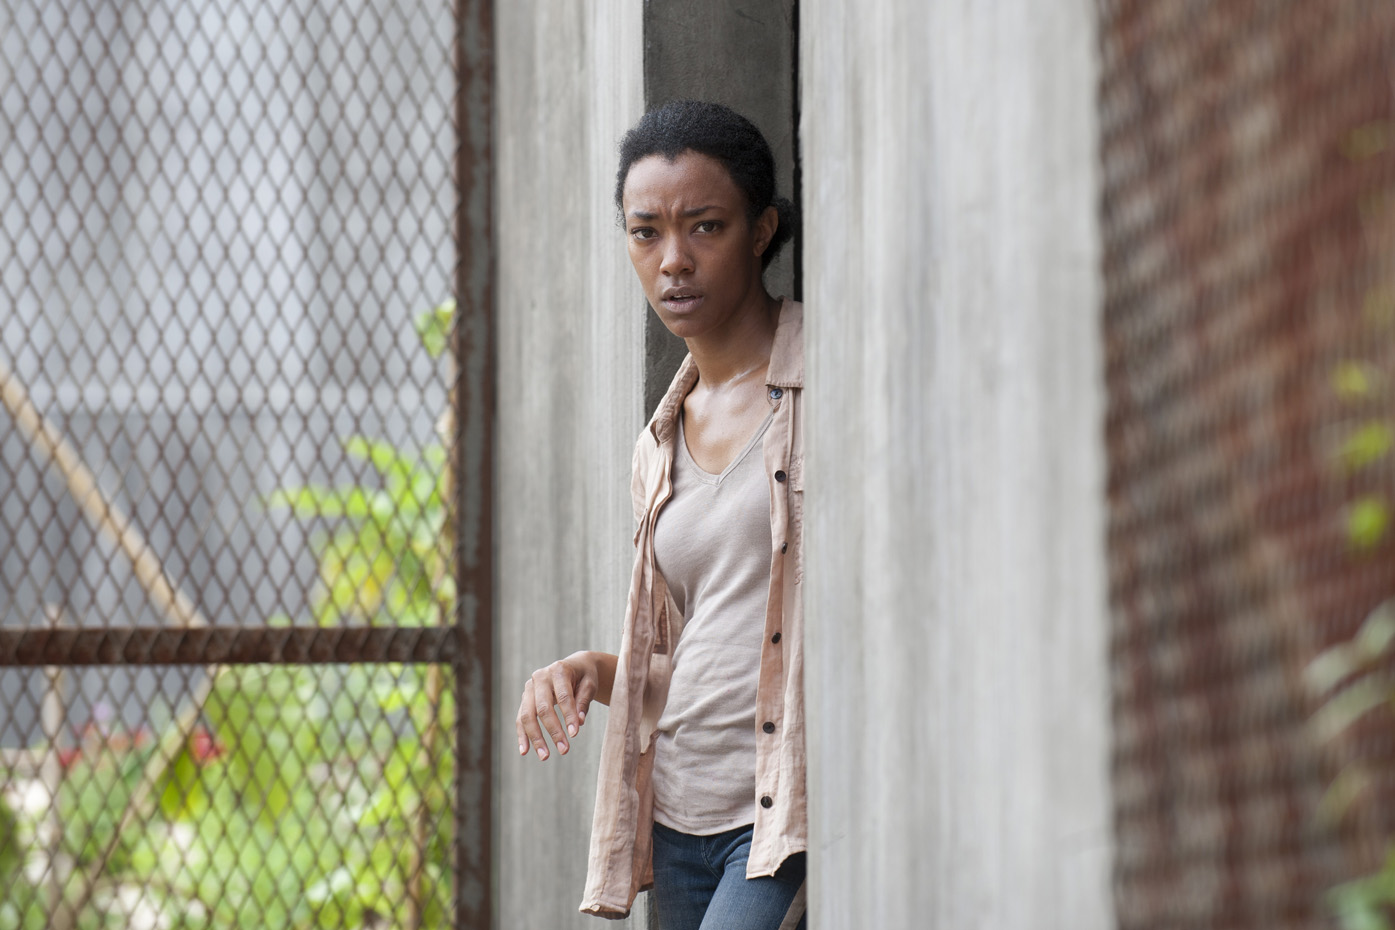 The Walking Dead - 04x03 - Isolation